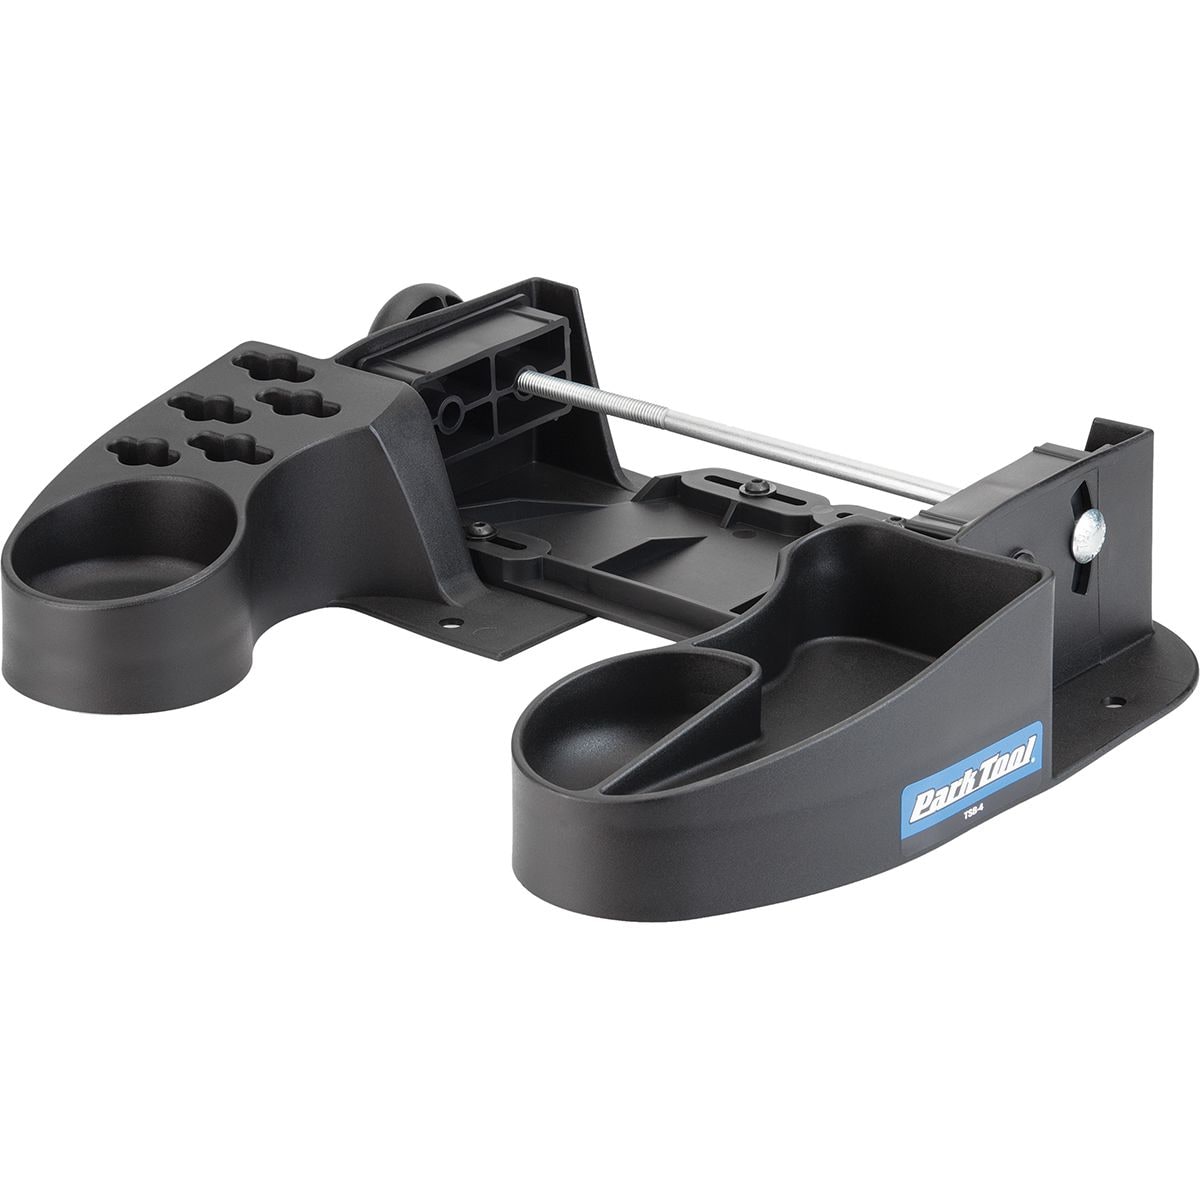 Park Tool TS-4 Truing Stand Tilting Base